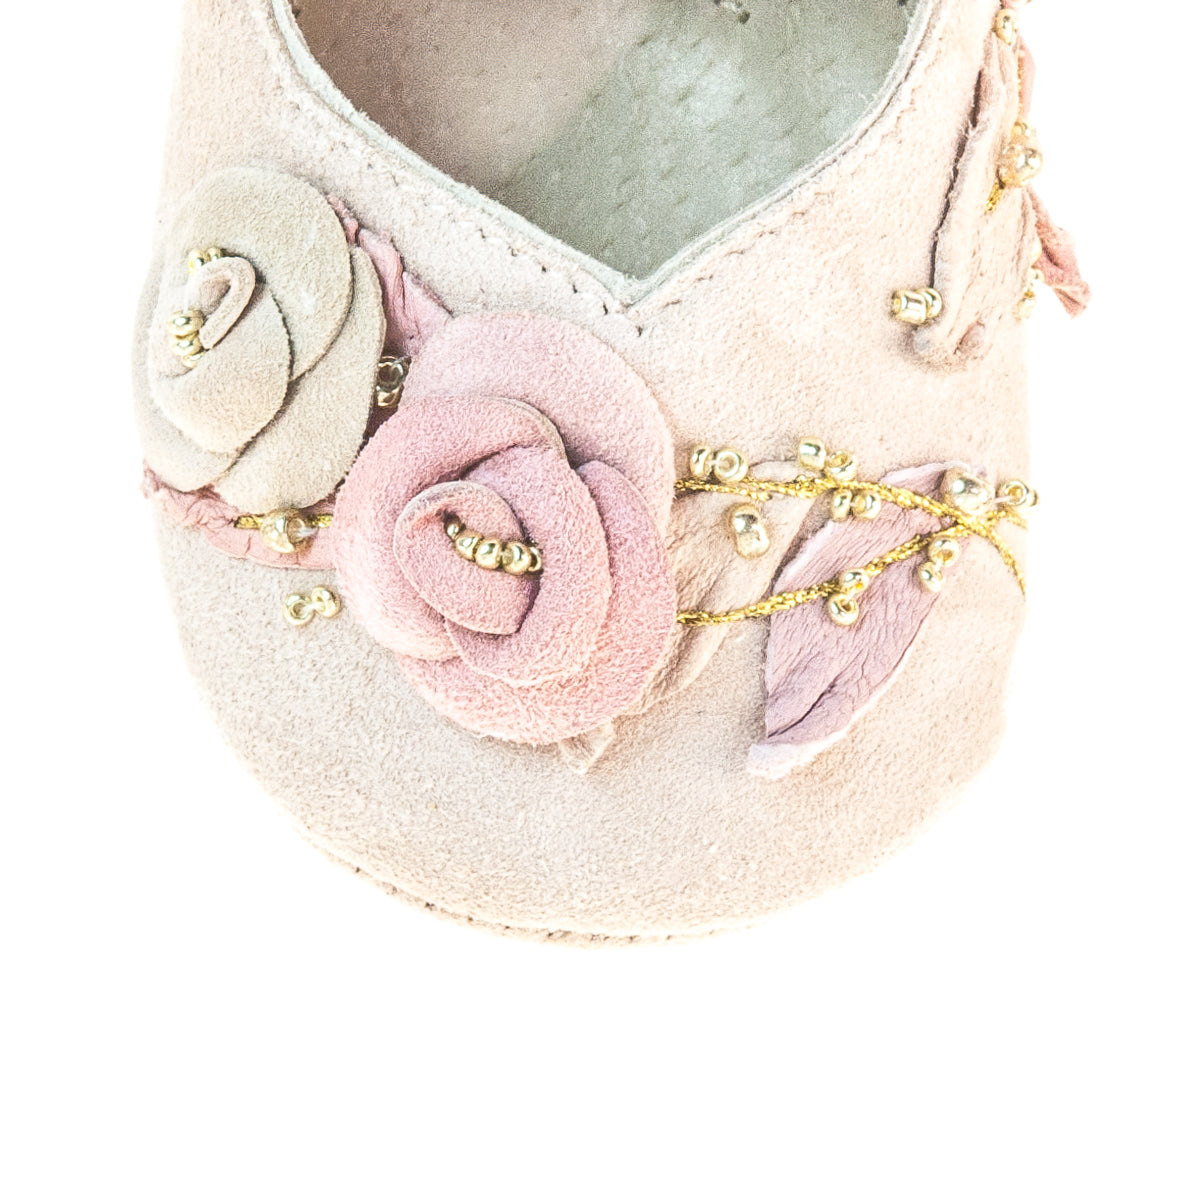 Vibys-Baby-Shoes-Briar-Rose-details-view